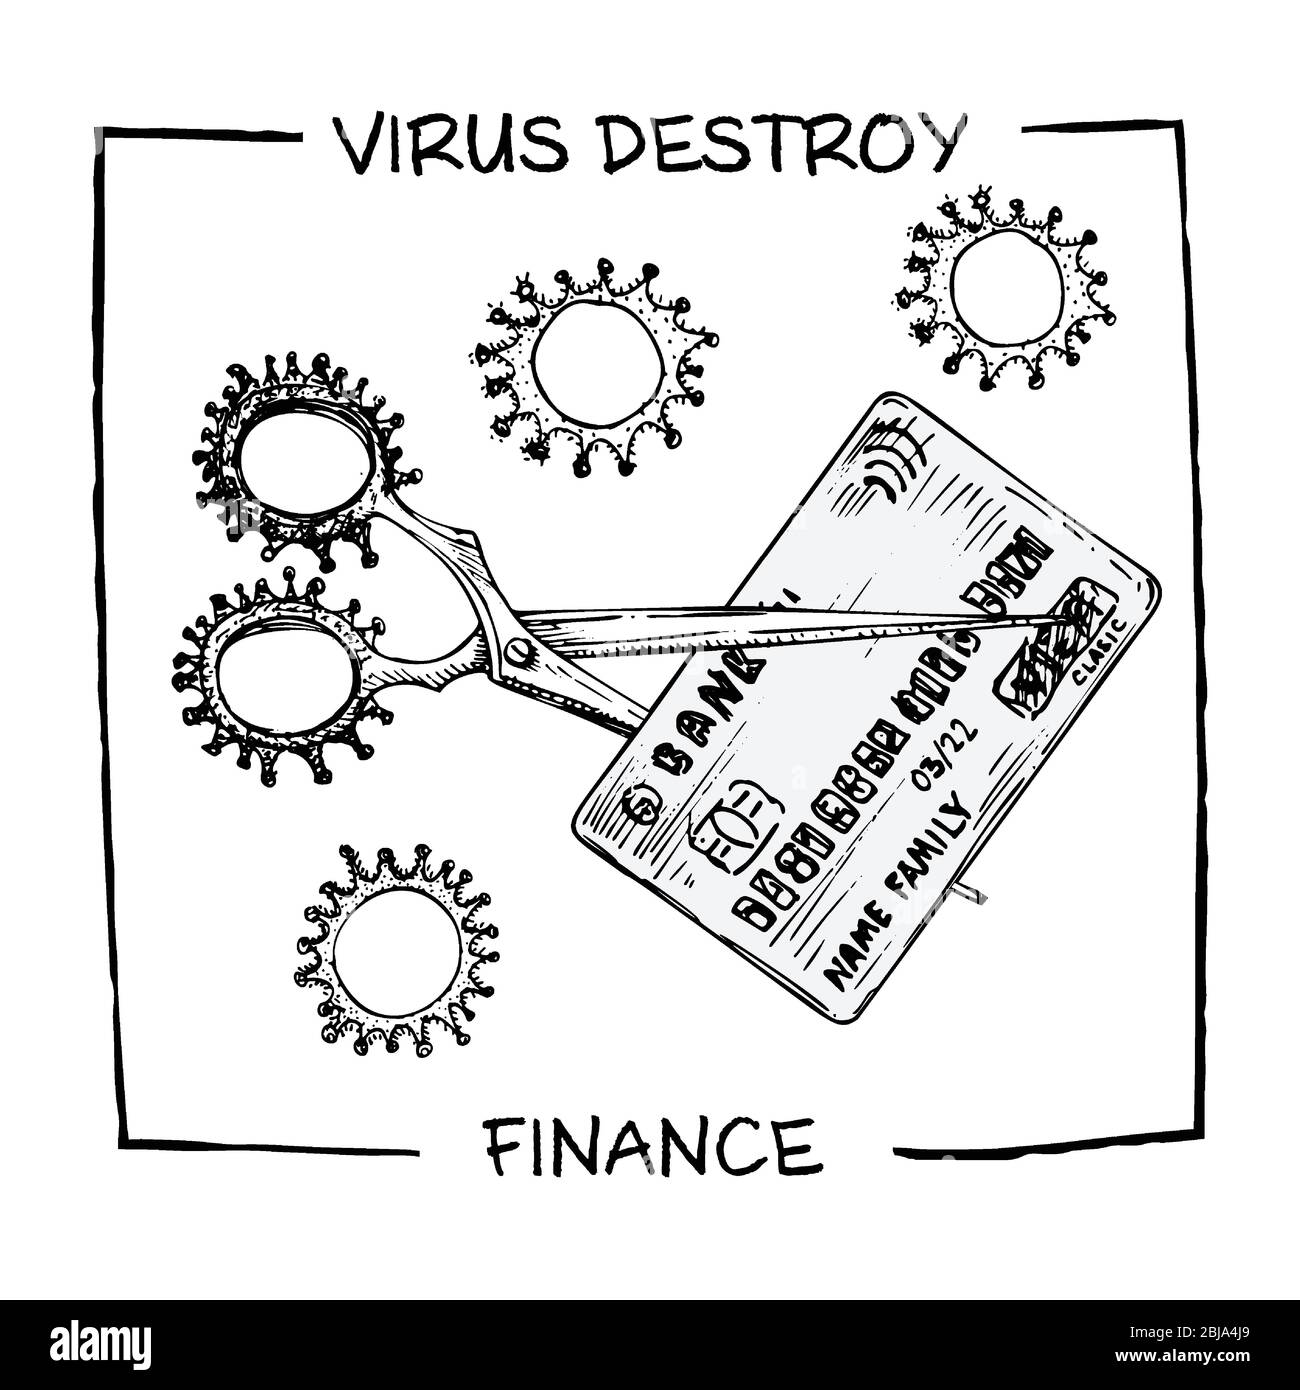 Poster against coronavirus epidemic with text virus destroy finance. Design concept for economic and financial information projects. Scissors cut Stock Vector